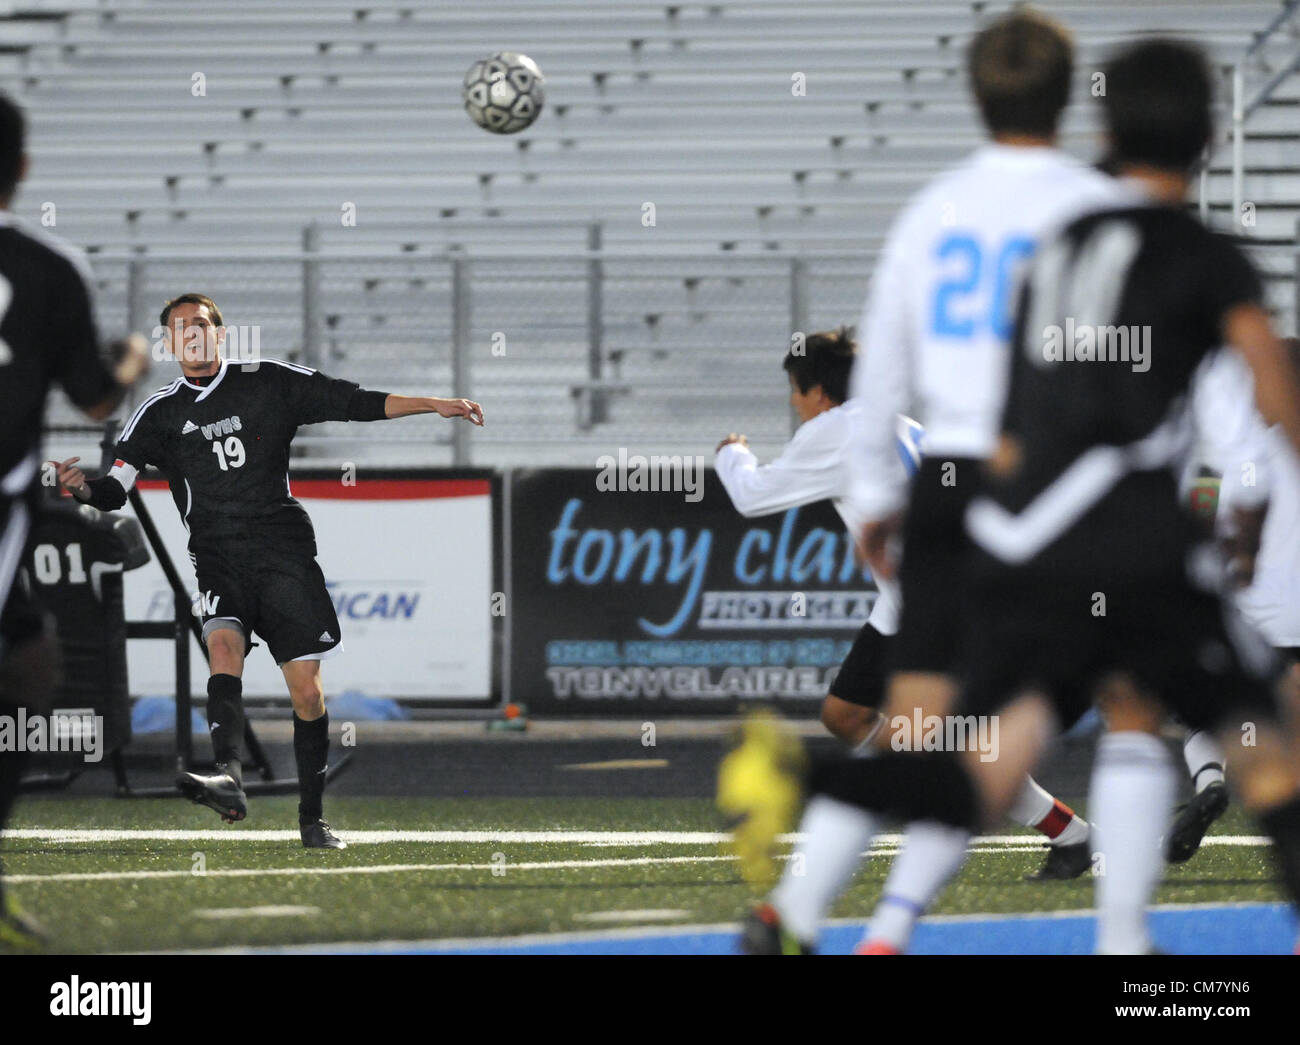 Oct. 24, 2012 - Albuquerque, NM, U.S. - Volcano Vista and Cleveland battle it out in boys soccer Wed. night. Wednesday, Oct. 24, 2012. (Credit Image: © Jim Thompson/Albuquerque Journal/ZUMAPRESS.com) Stock Photo